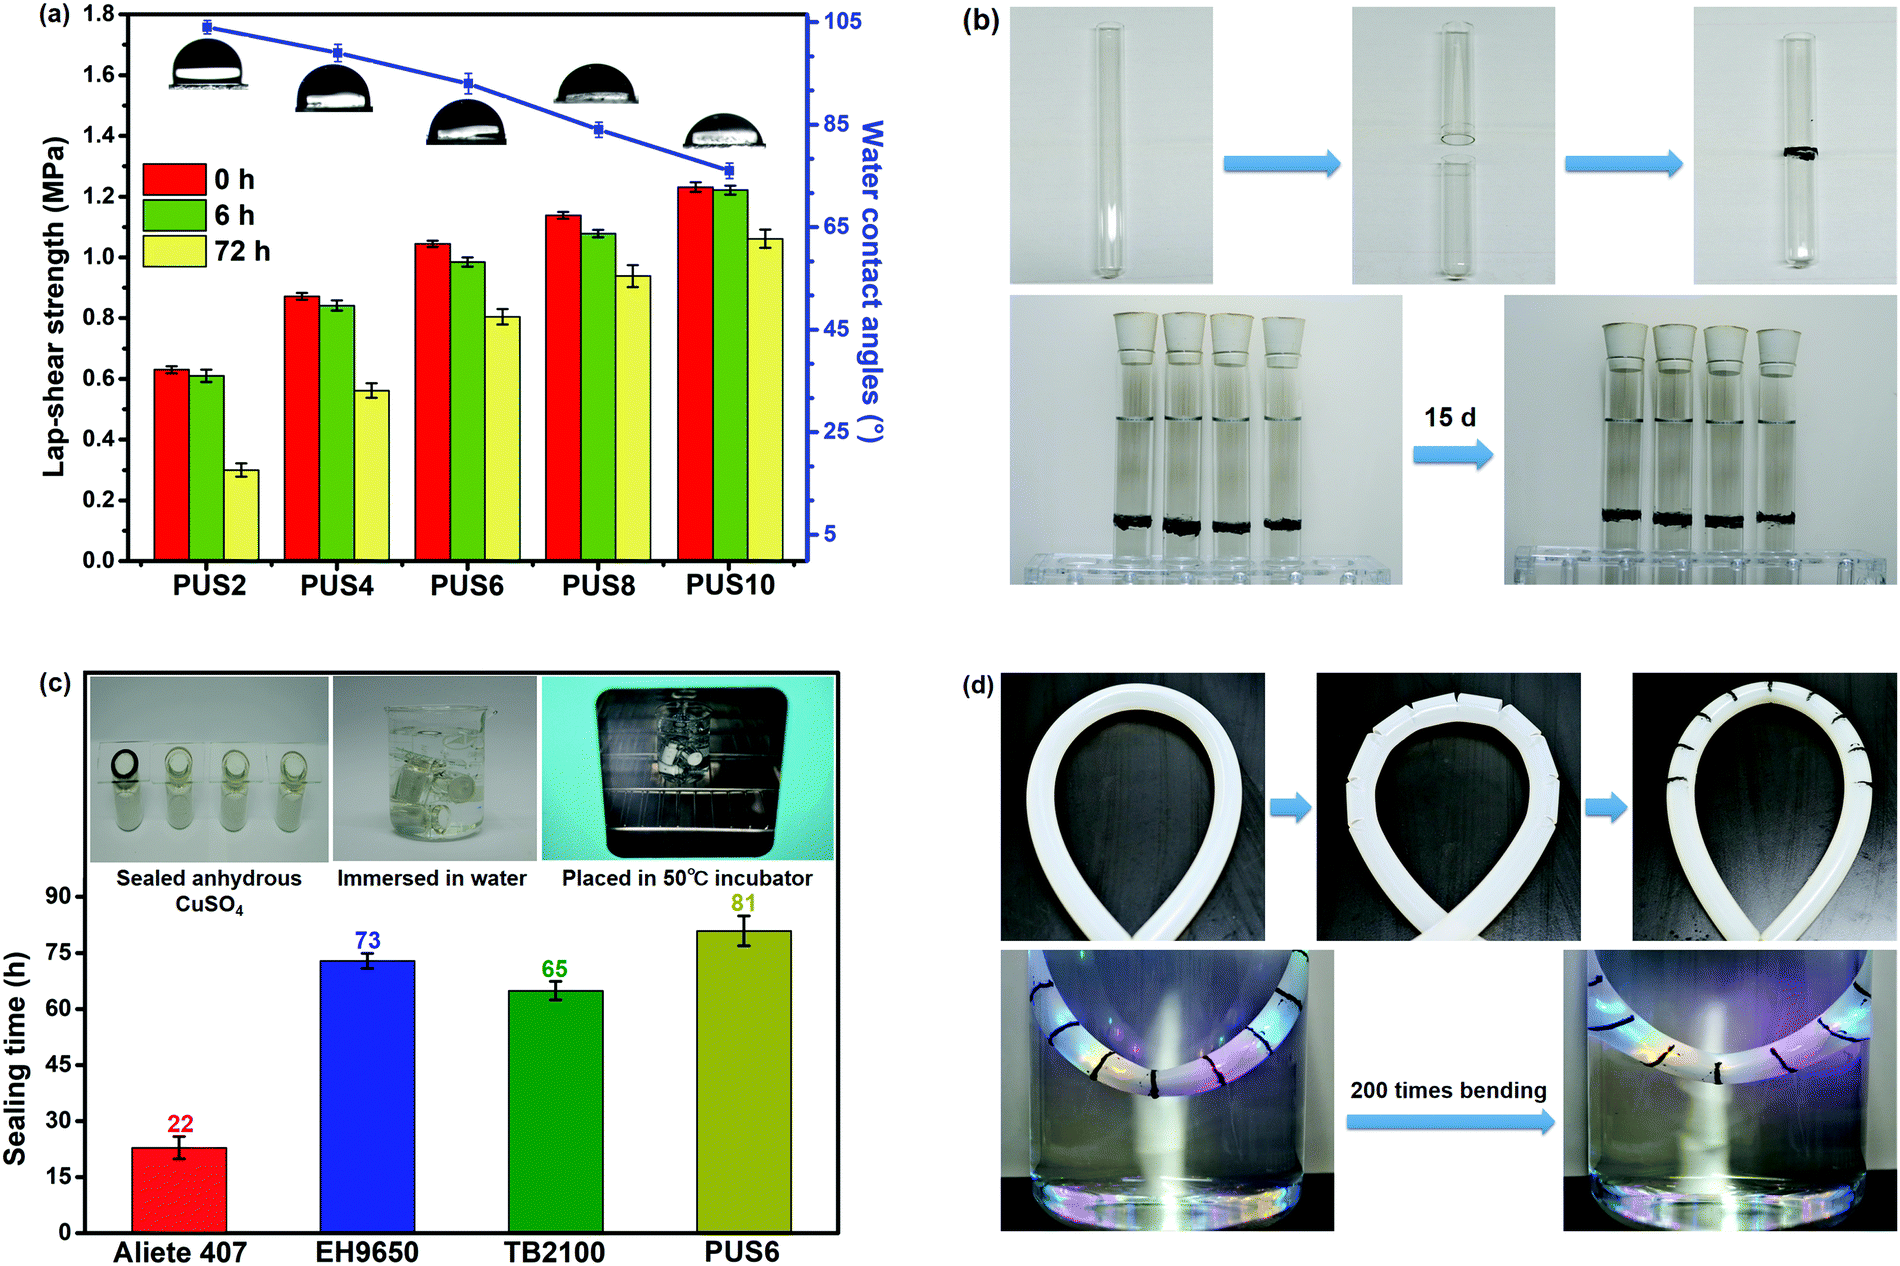 A Self Healing Flexible Urea G Mwcnts Poly Urethane Sulfide Nanocomposite For Sealing Electronic Devices Journal Of Materials Chemistry C Rsc Publishing